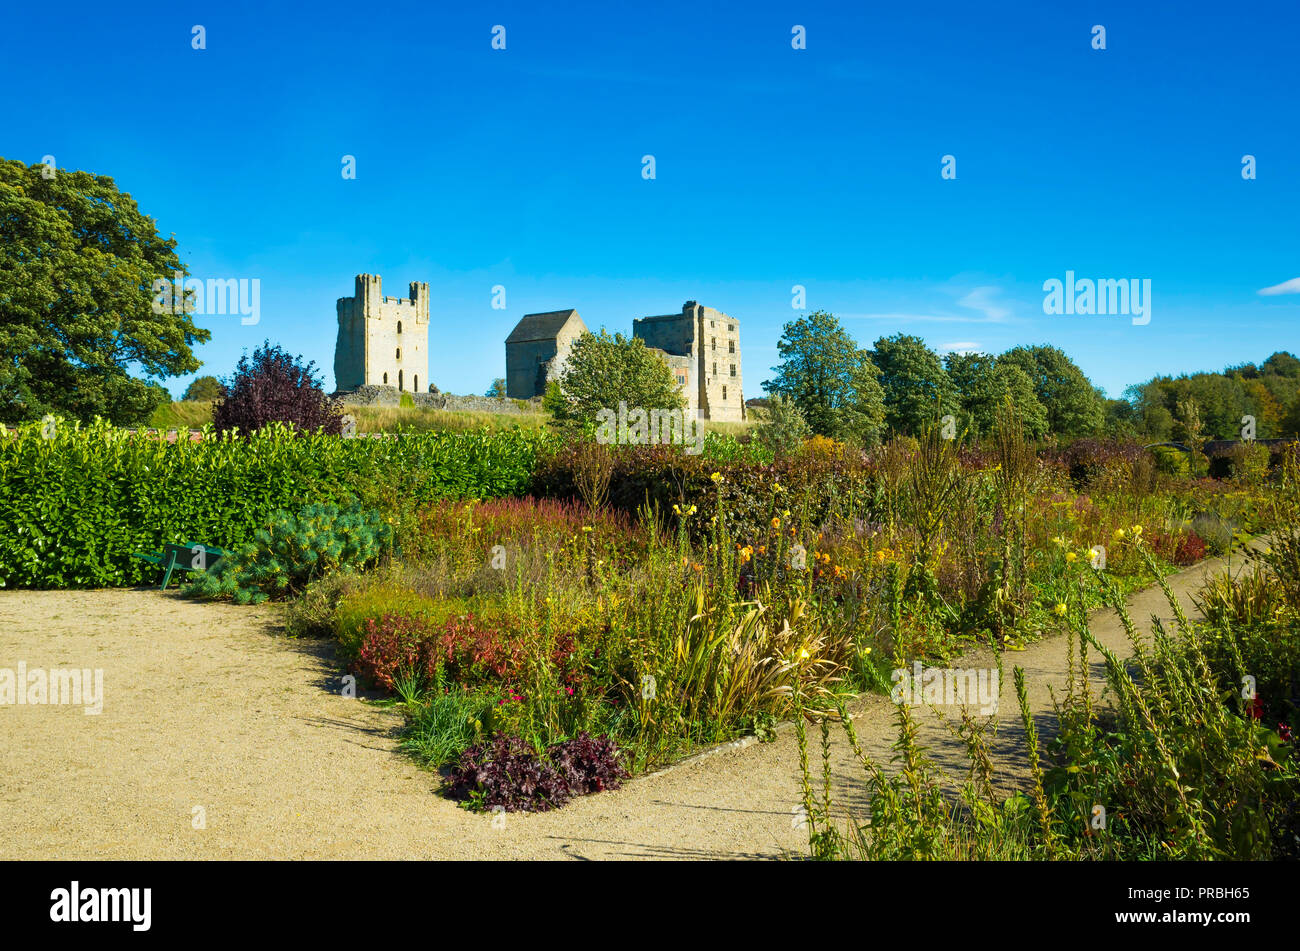 Helmsley Castle overlooking the Helmsley Walled Garden with a show of autumn flowers Stock Photo